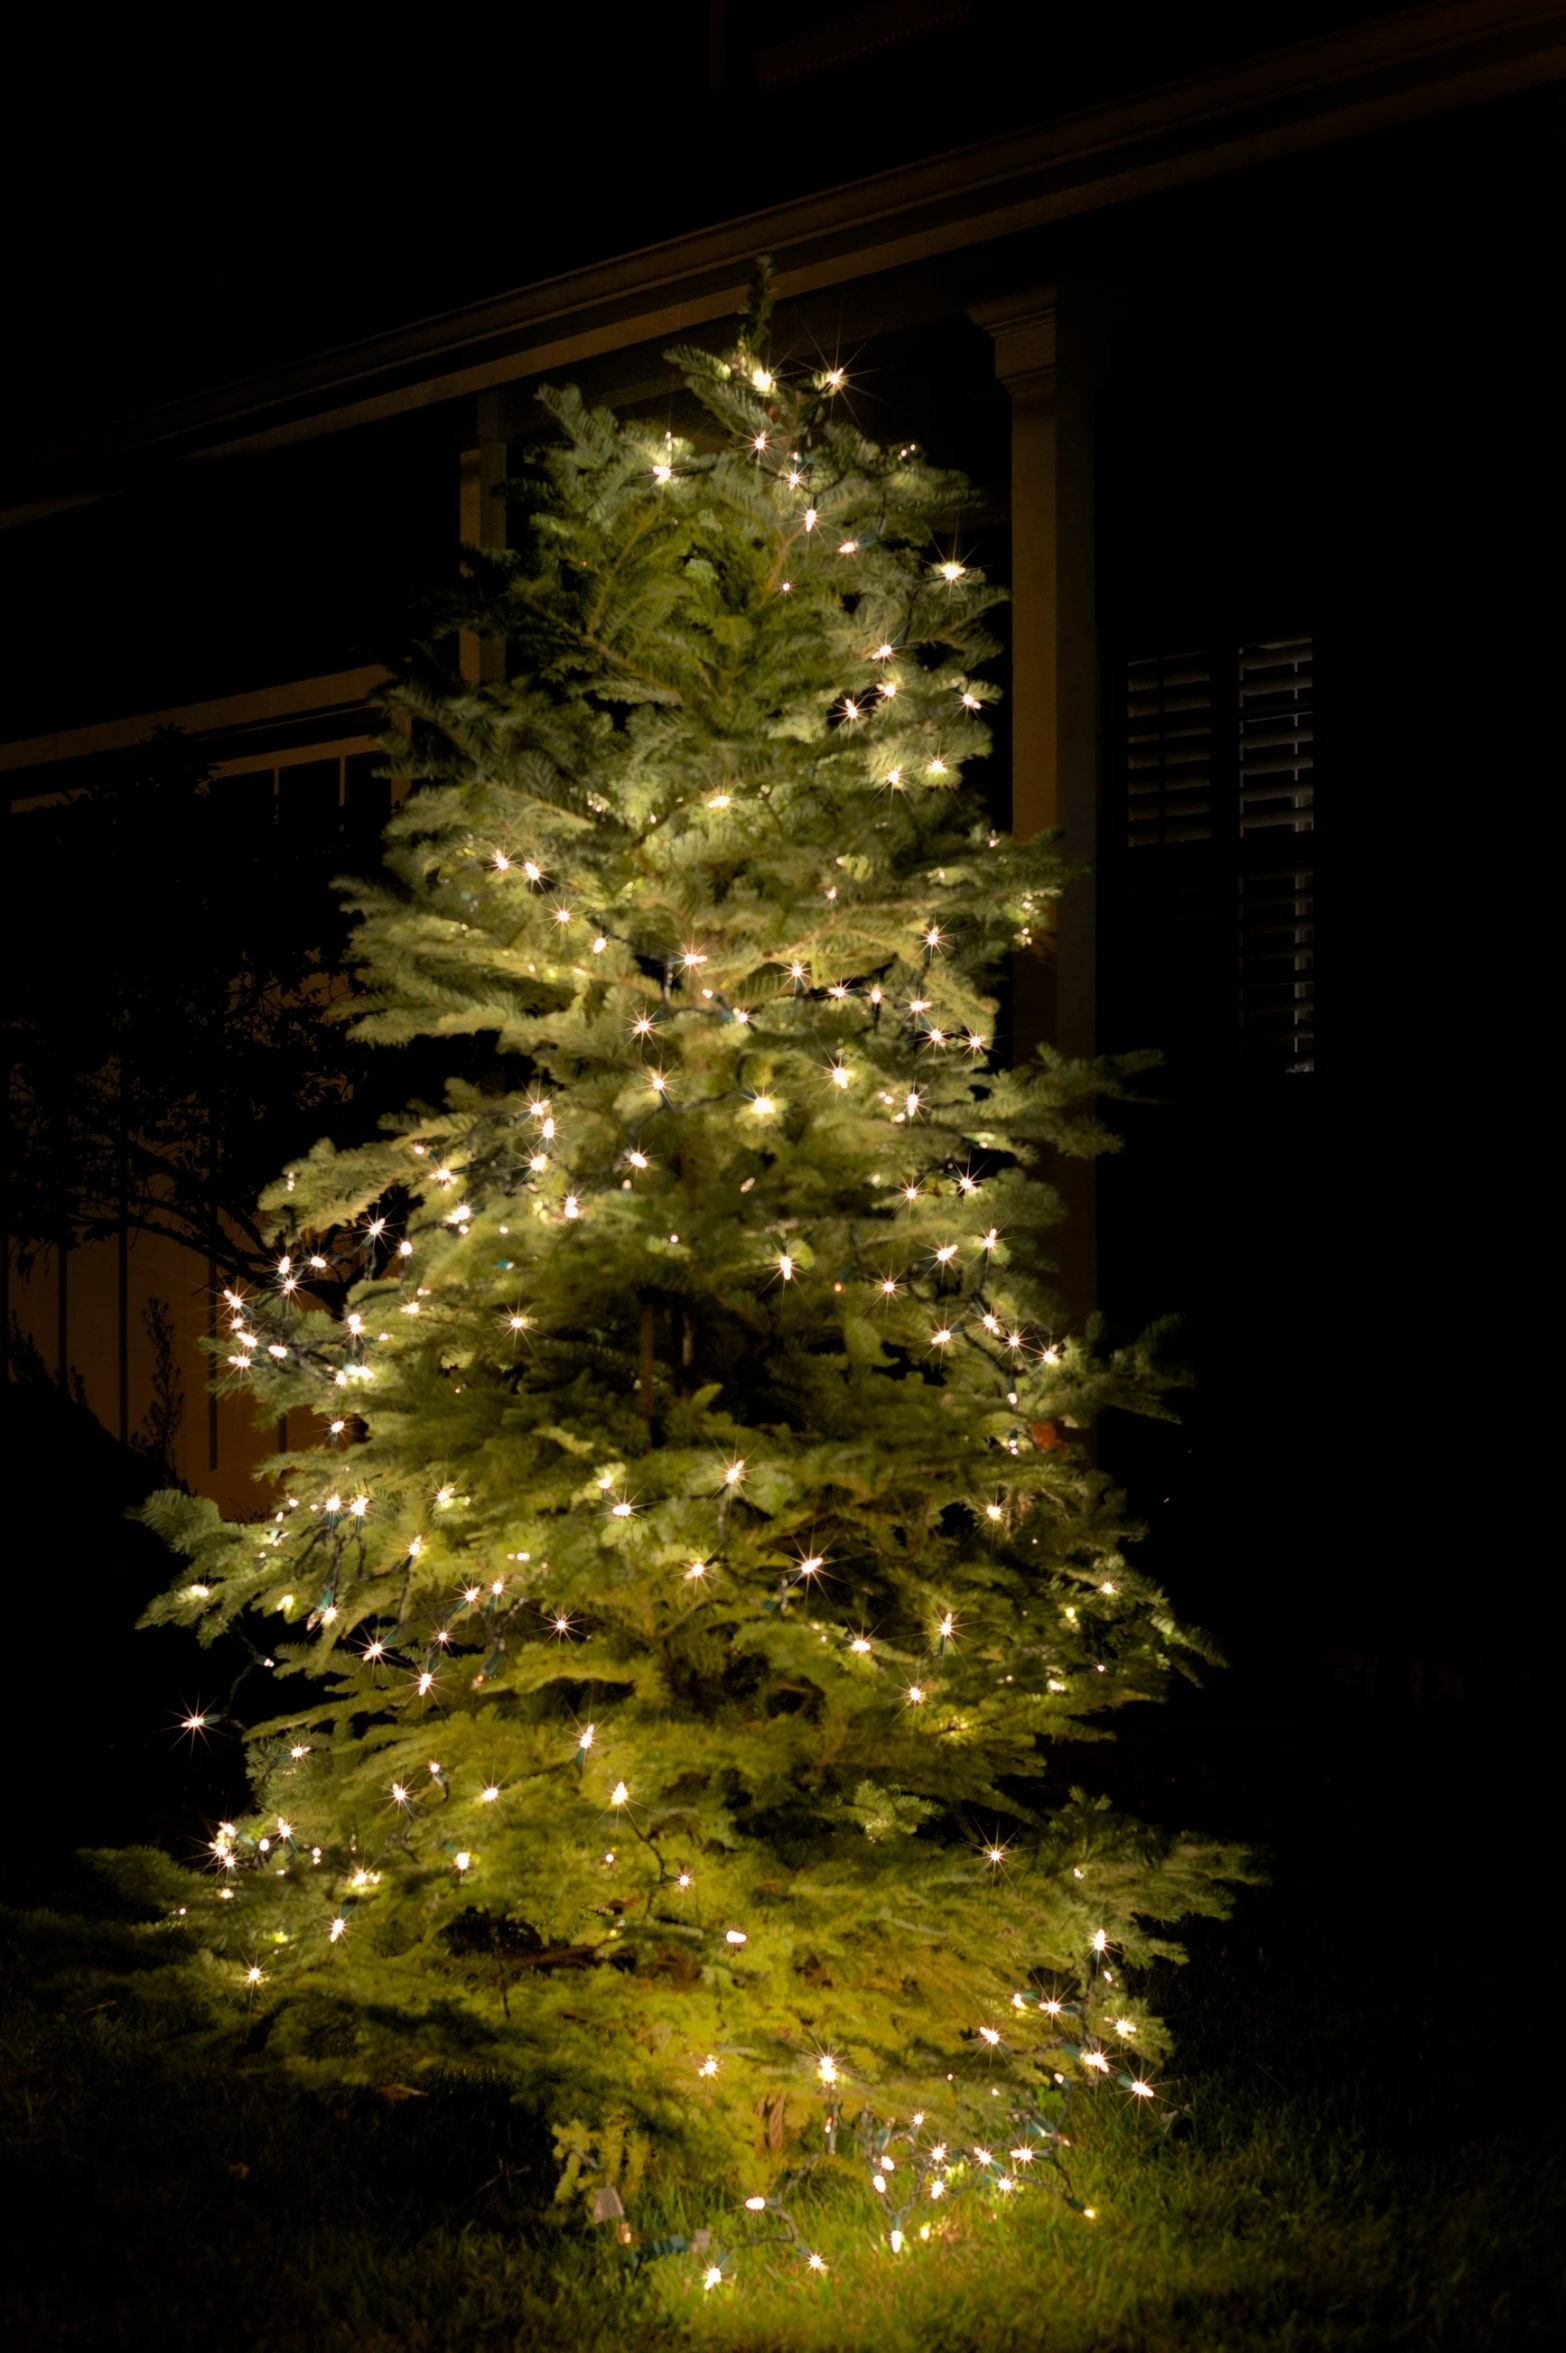 the small pine tree is lit up with white lights